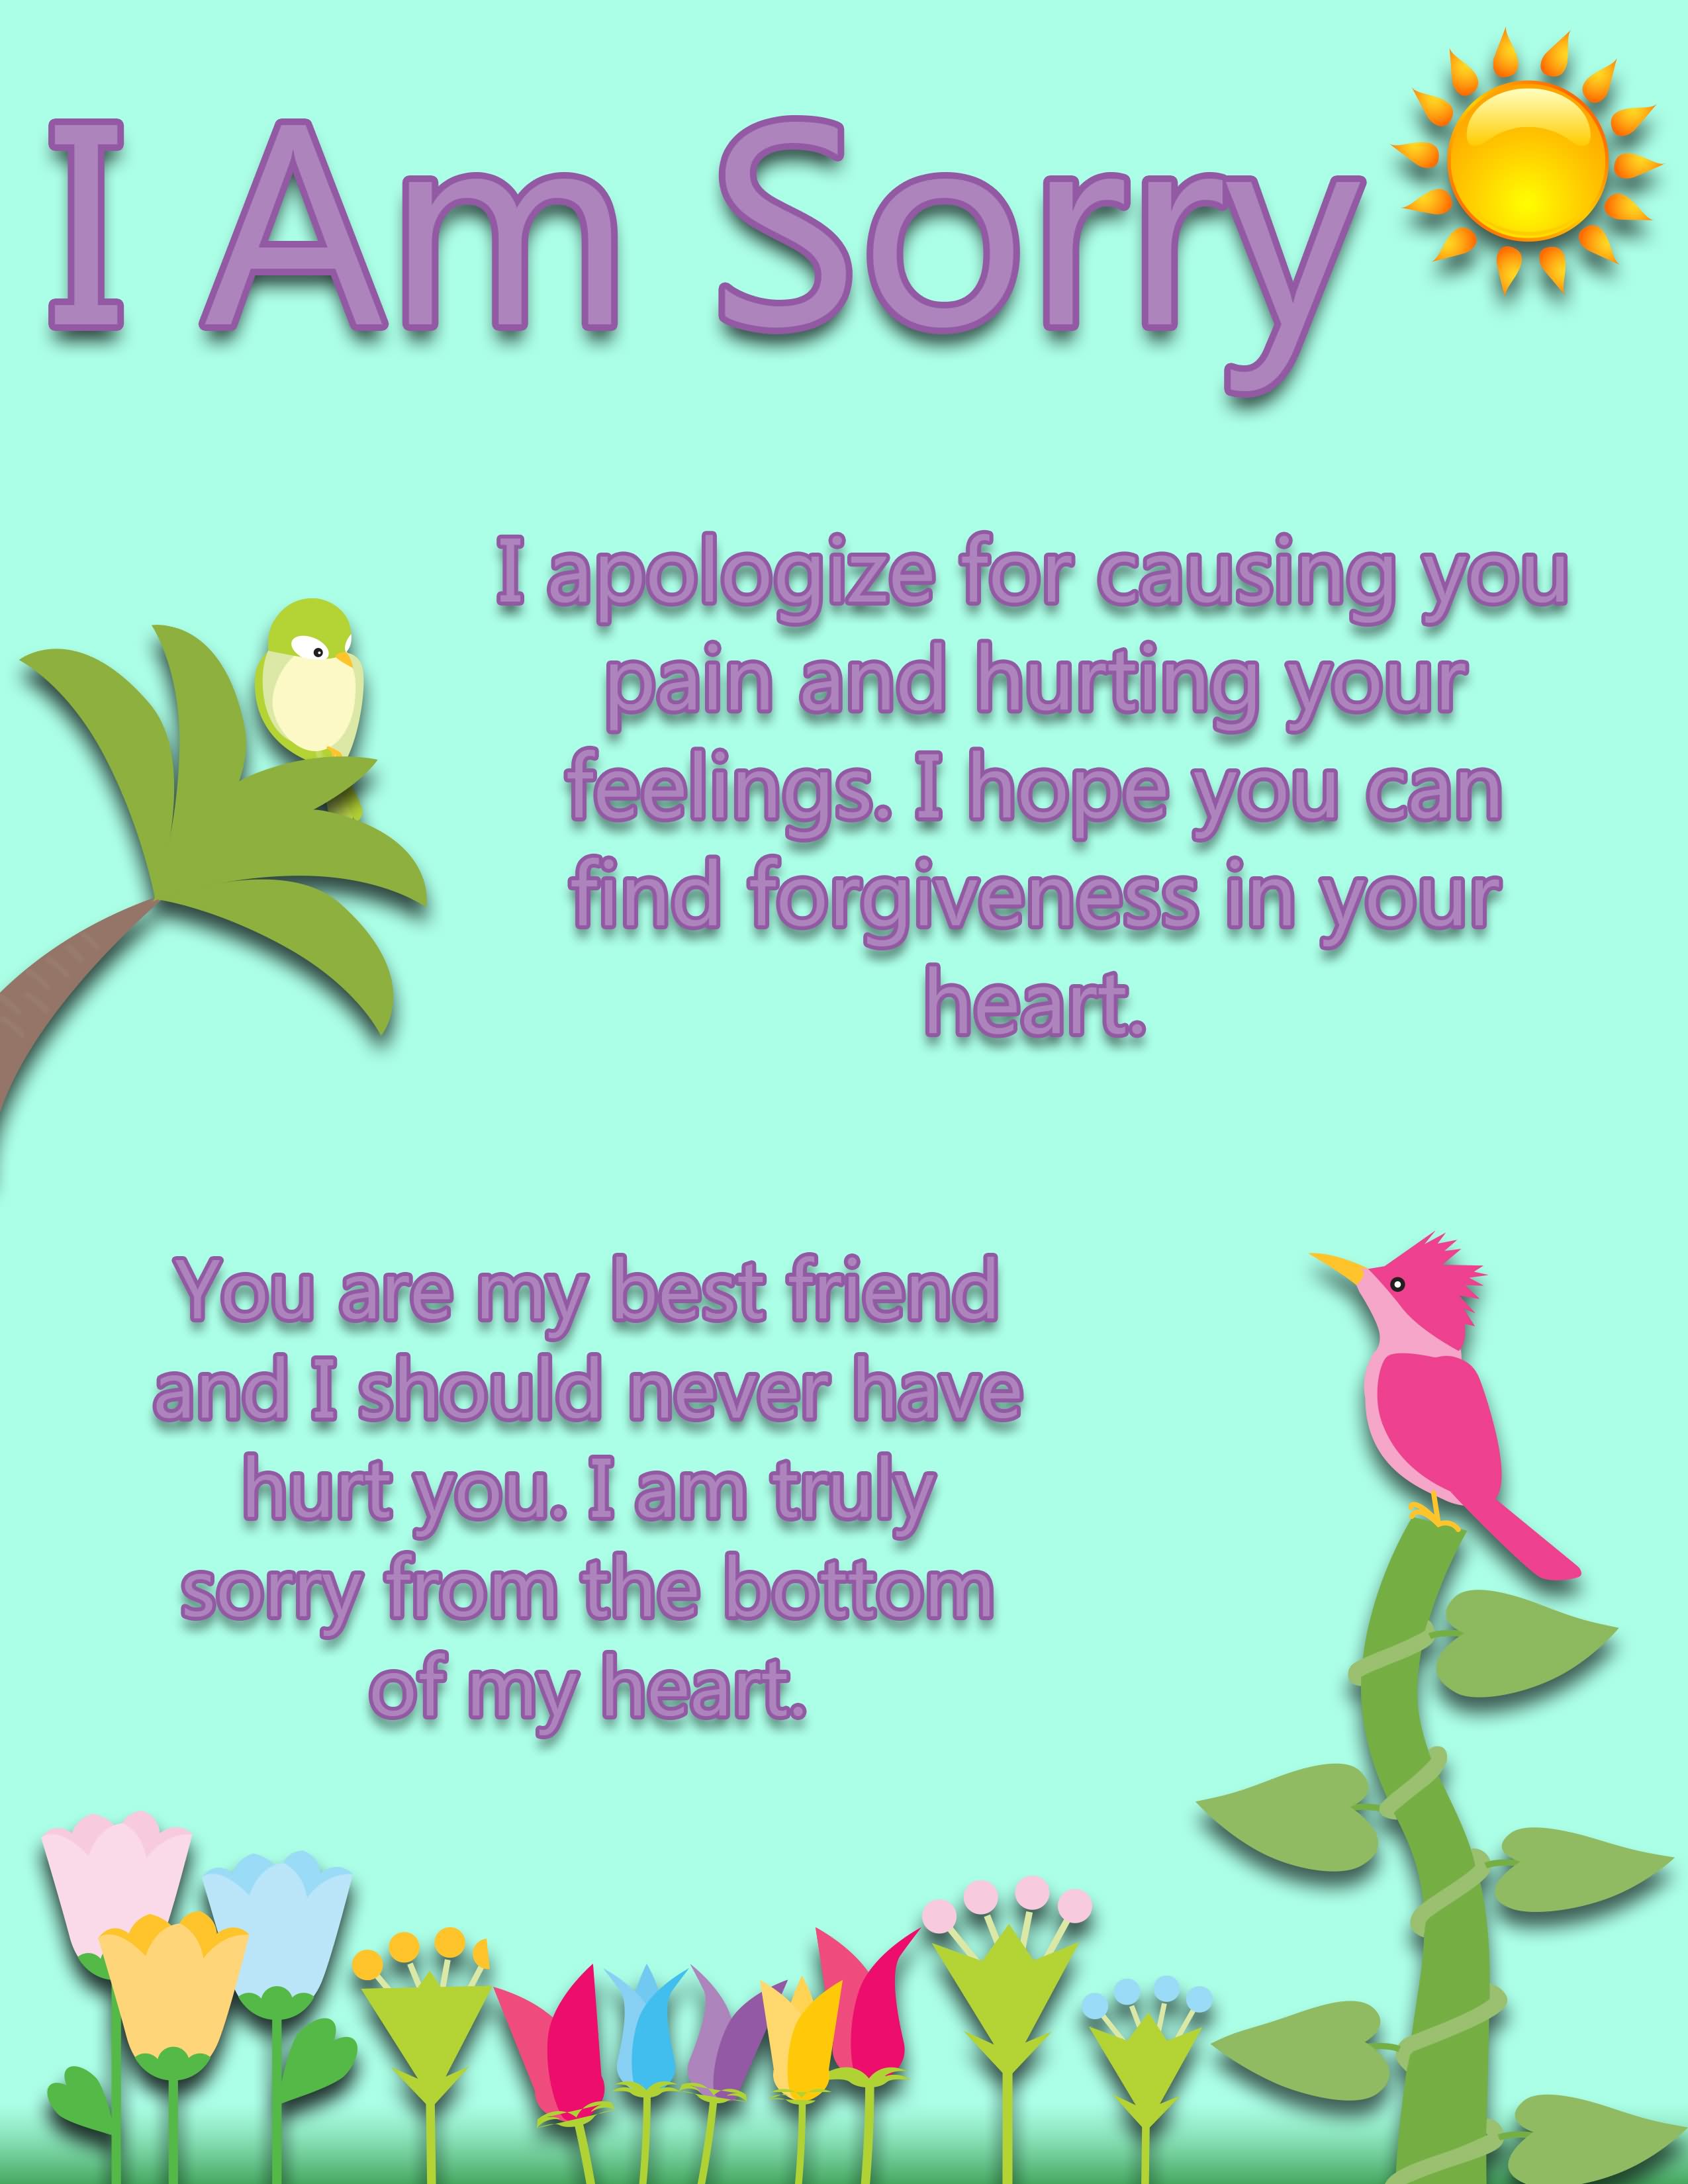 I Am Sorry You're My Best Friend